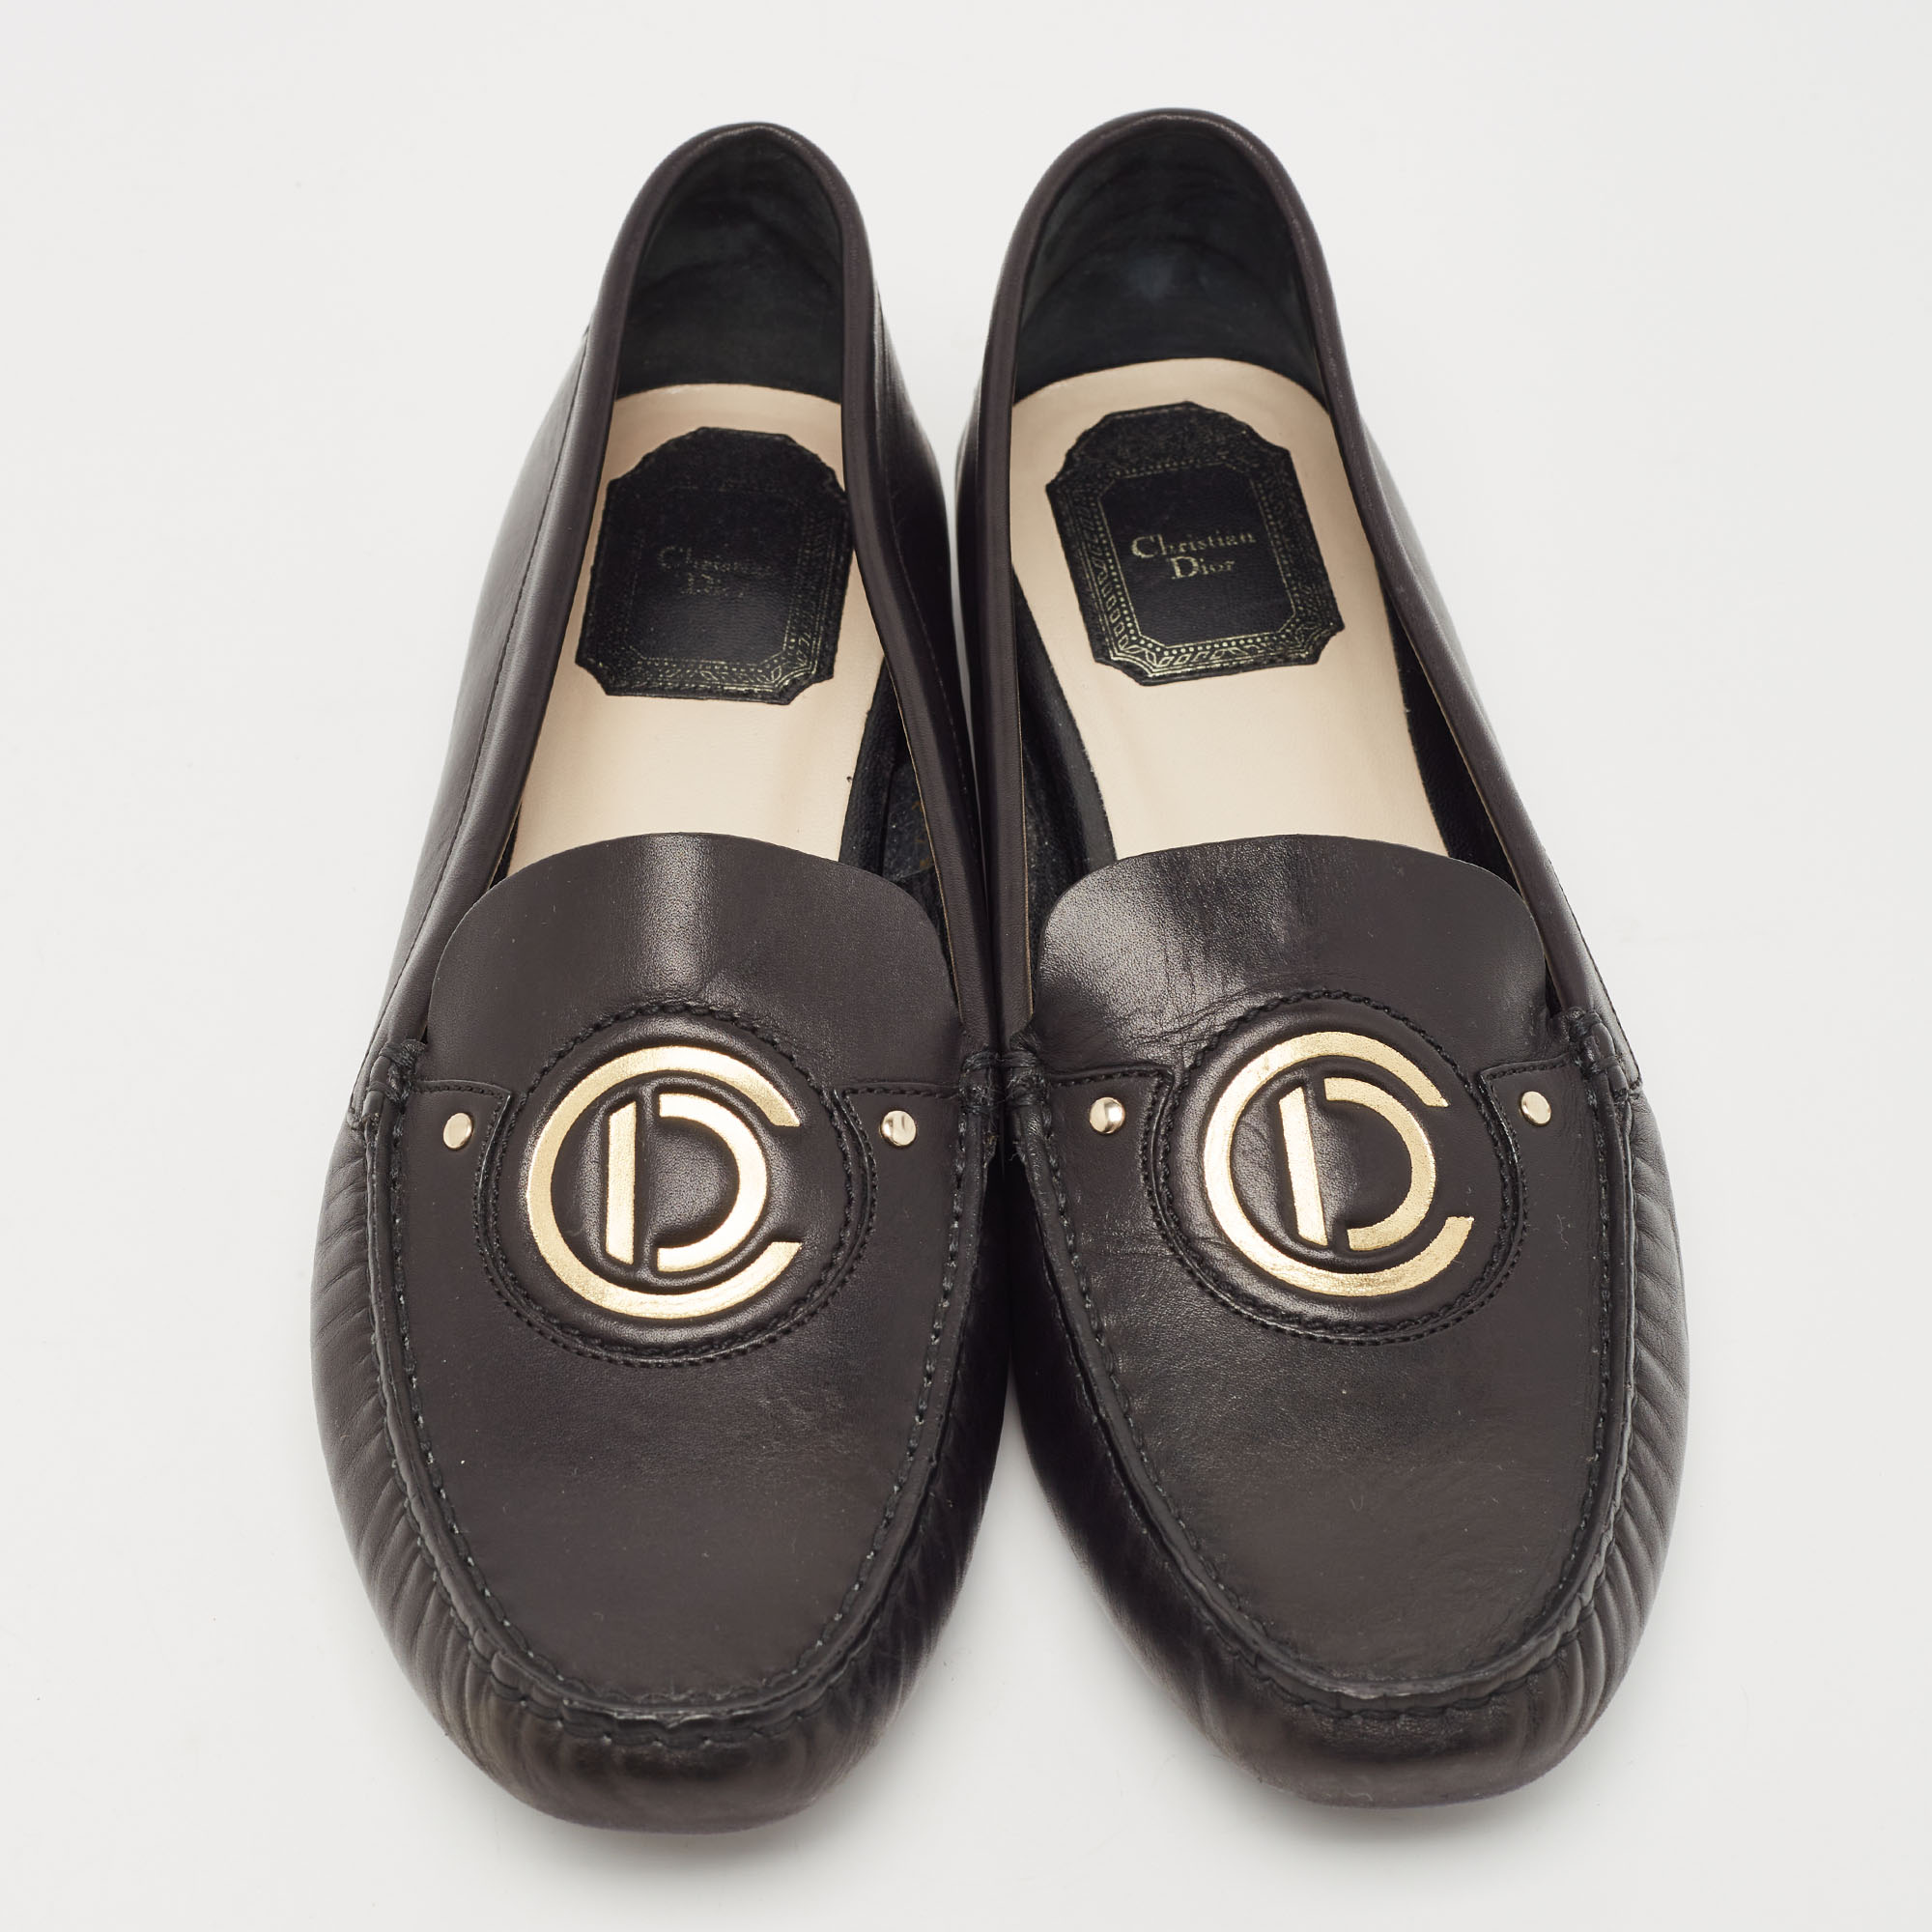 Dior Black Leather Slip On Loafers Size 38